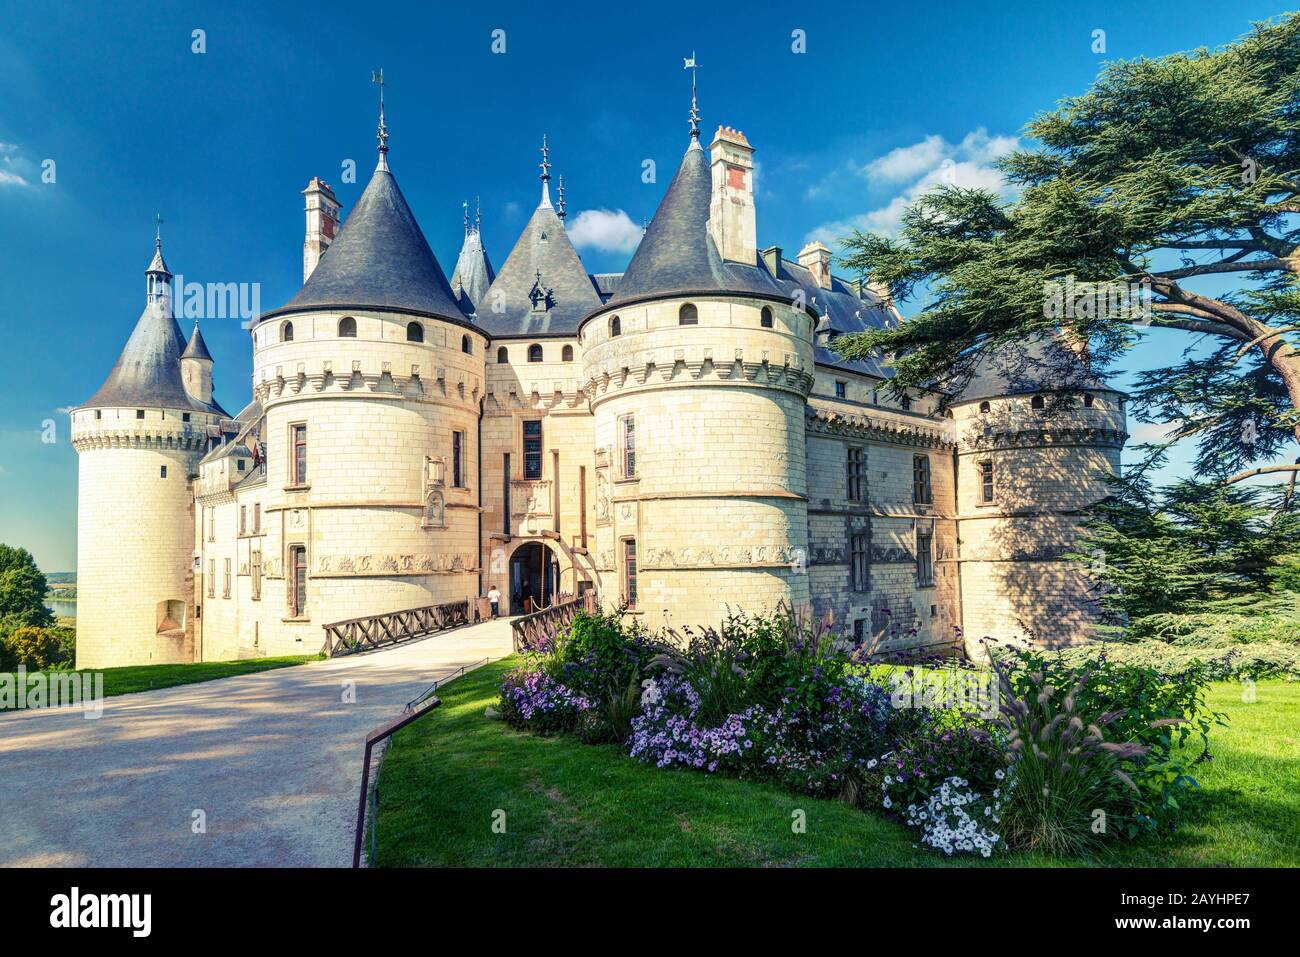 Chateau de Chaumont-sur-Loire, France. This castle is located in the Loire Valley, was founded in the 10th century and was rebuilt in the 15th century Stock Photo